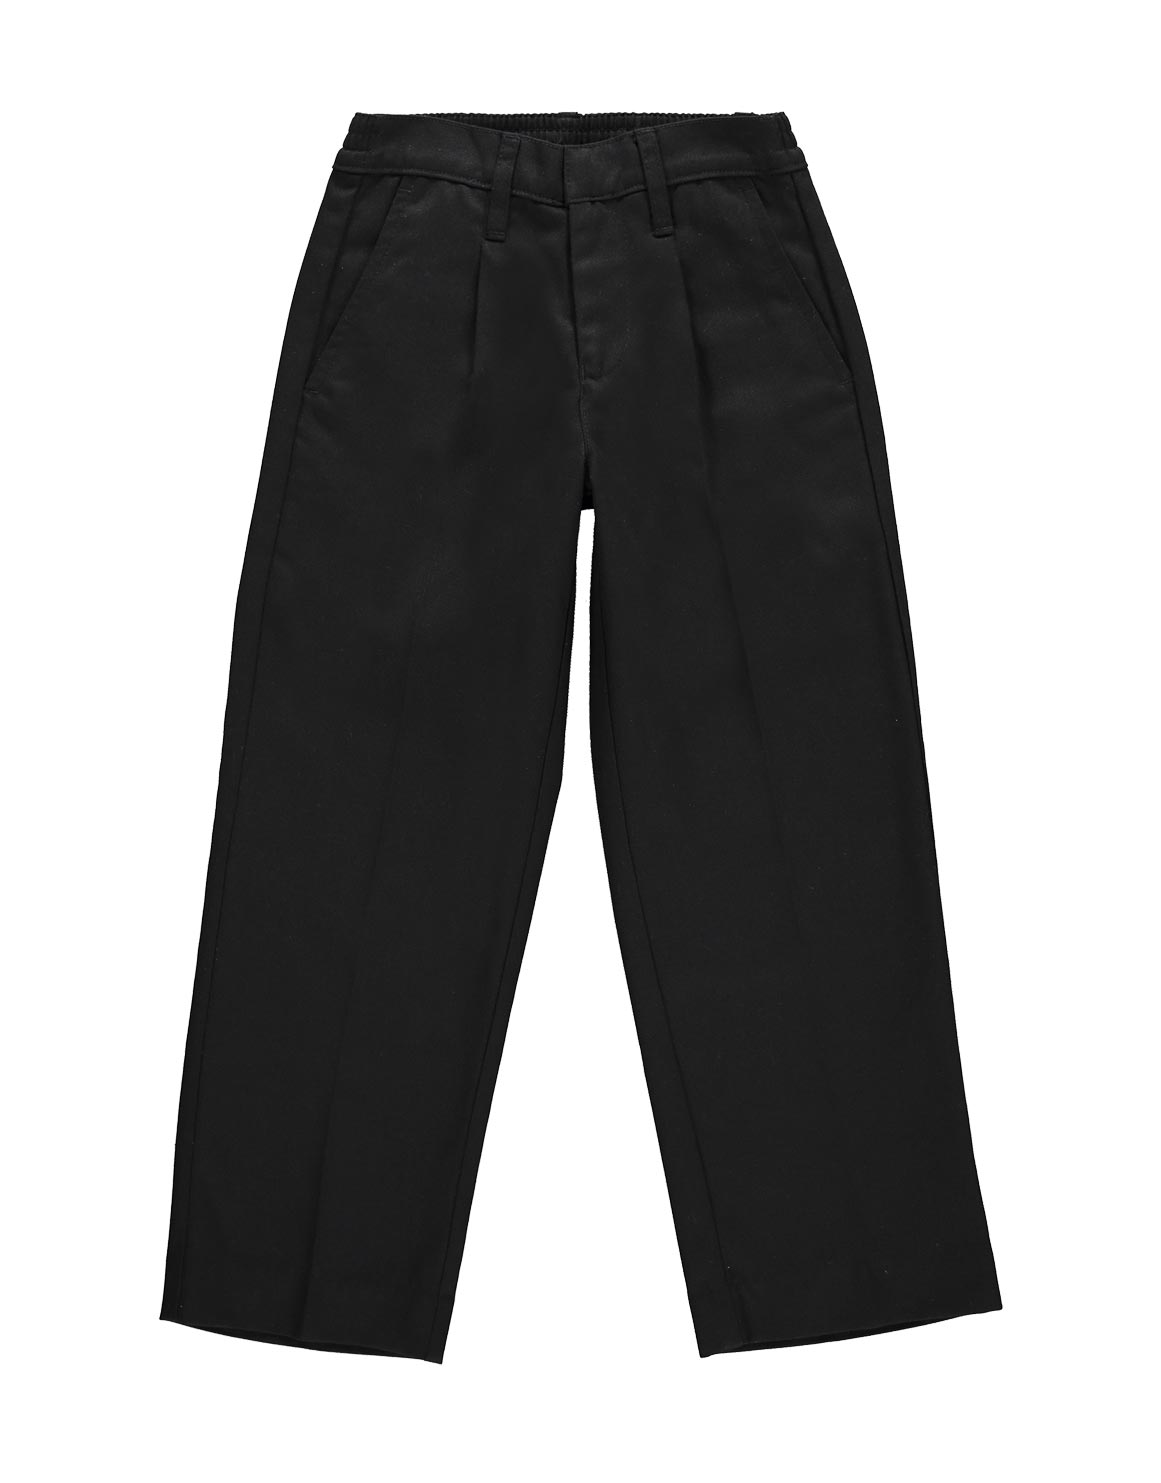 Buy Allen Solly Junior Black Cotton Trousers for Boys Clothing Online   Tata CLiQ